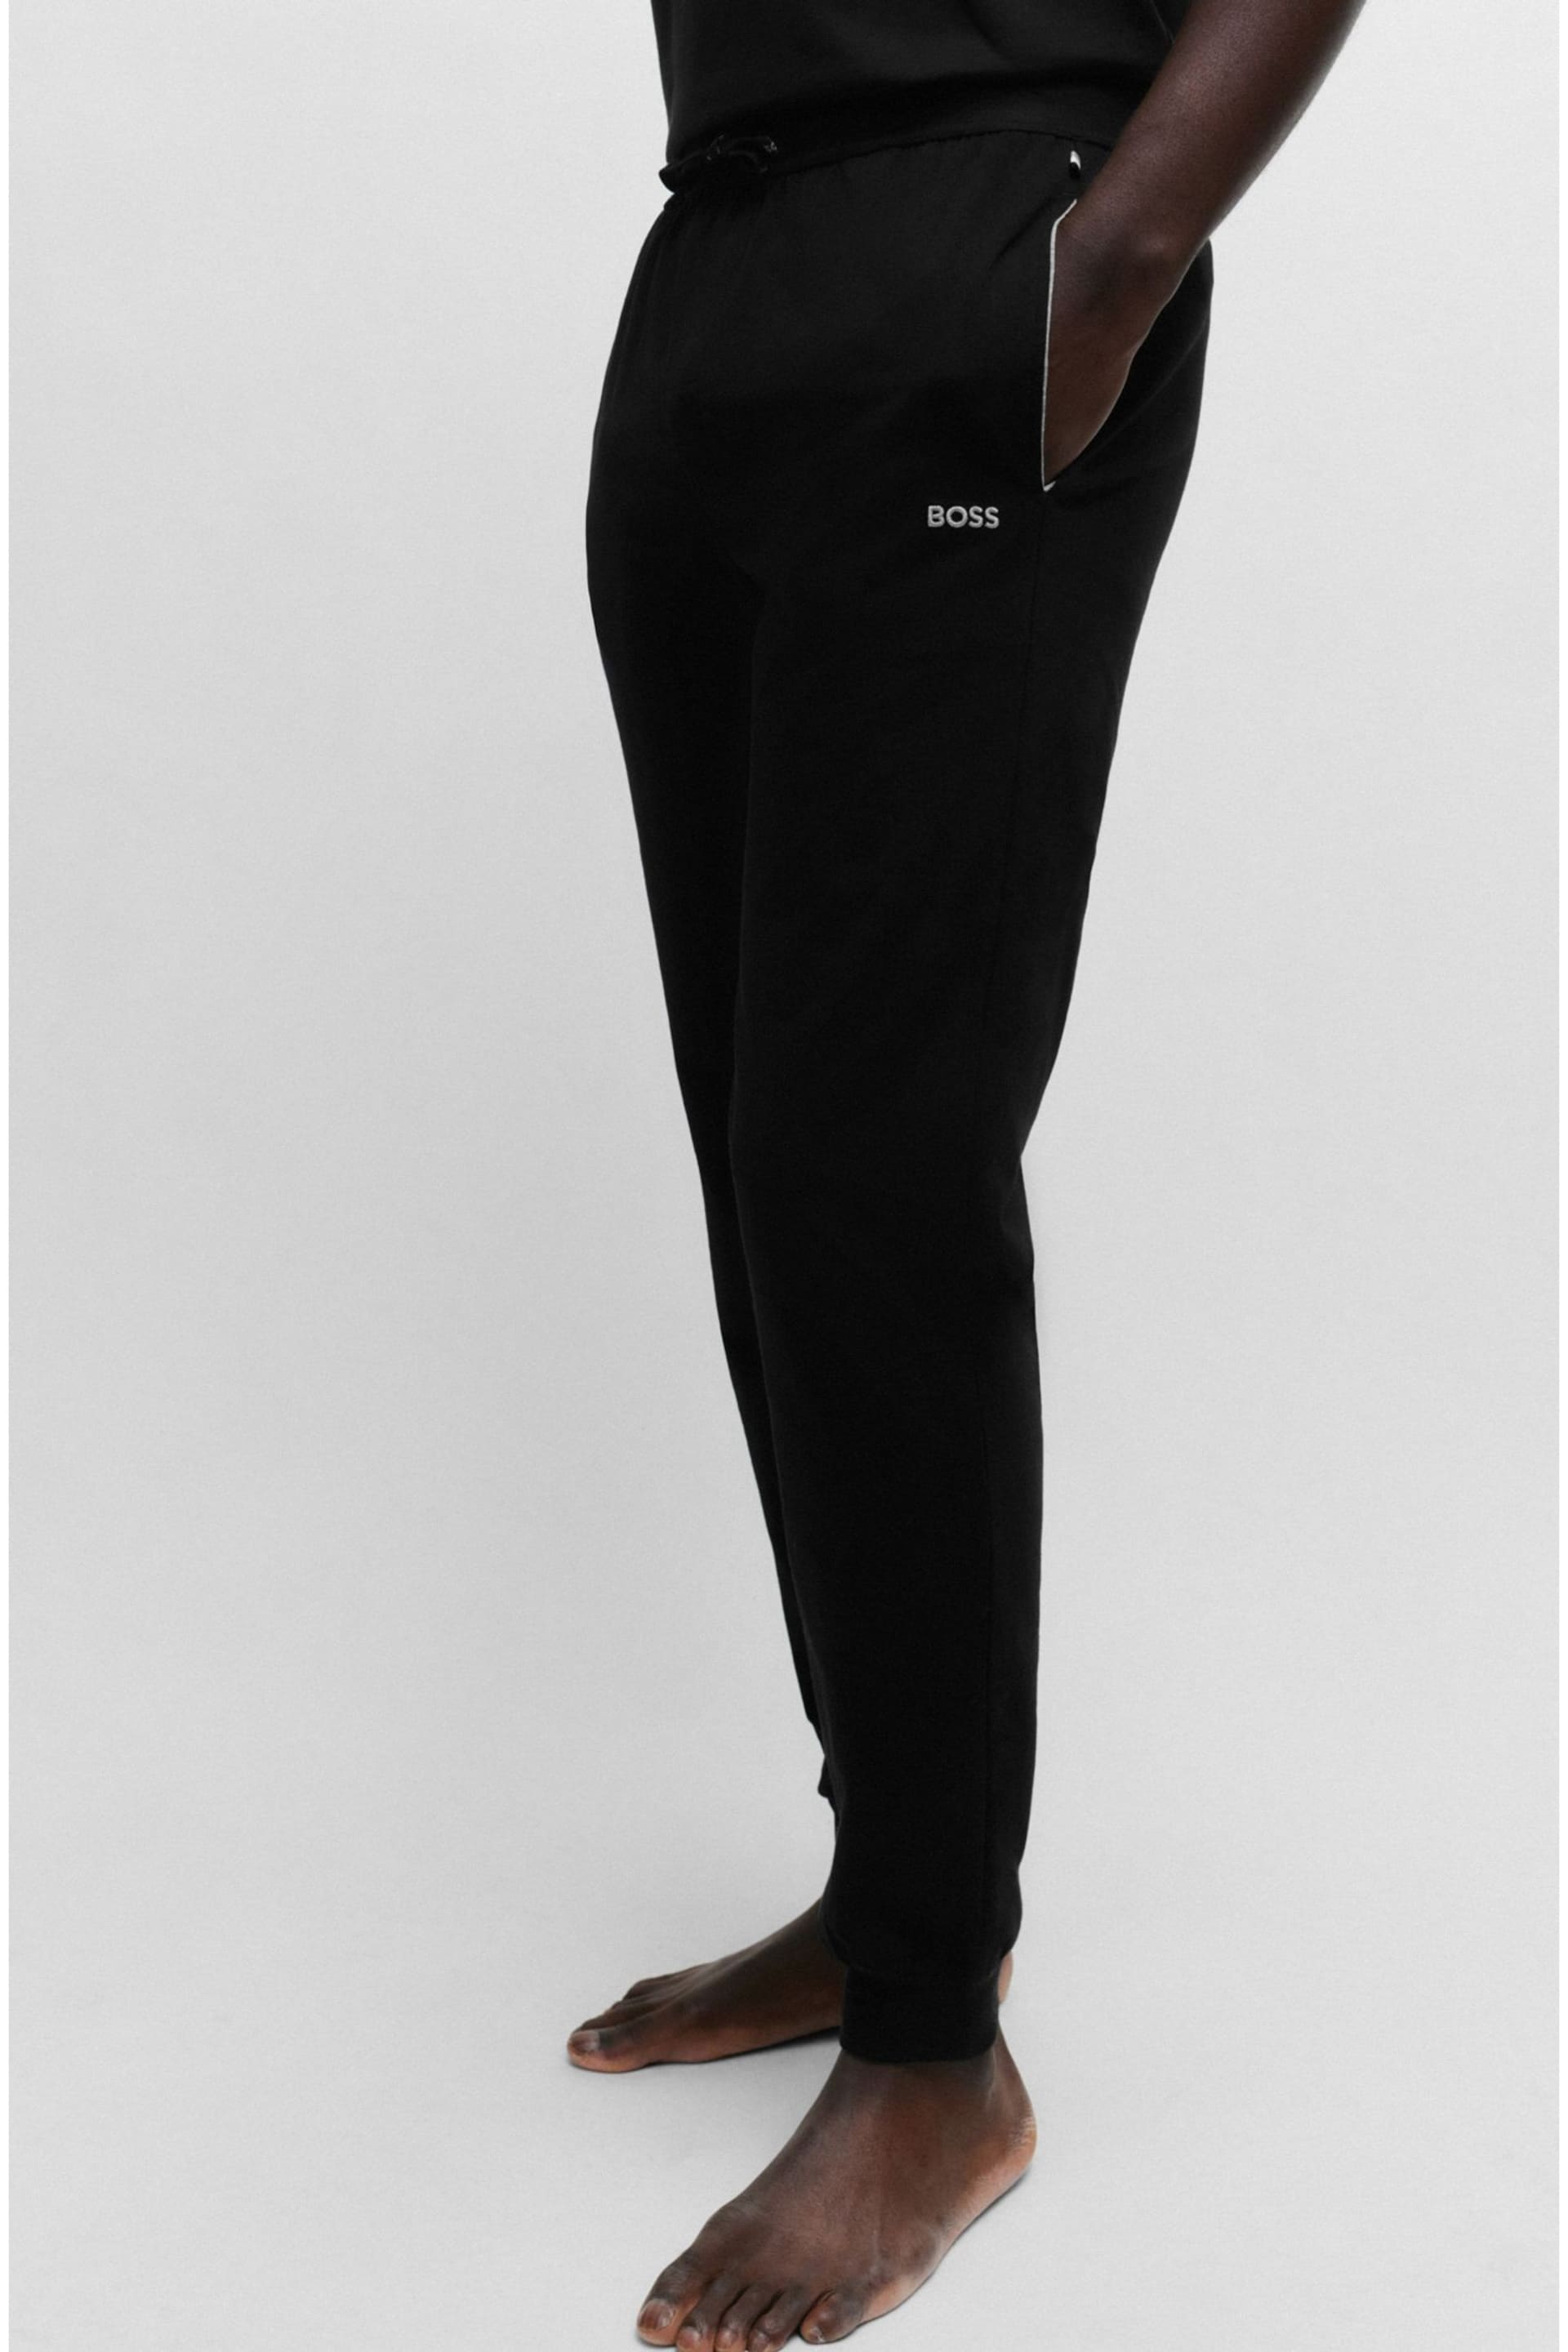 BOSS Black Logo-Detail Joggers In Stretch Cotton - Image 4 of 5